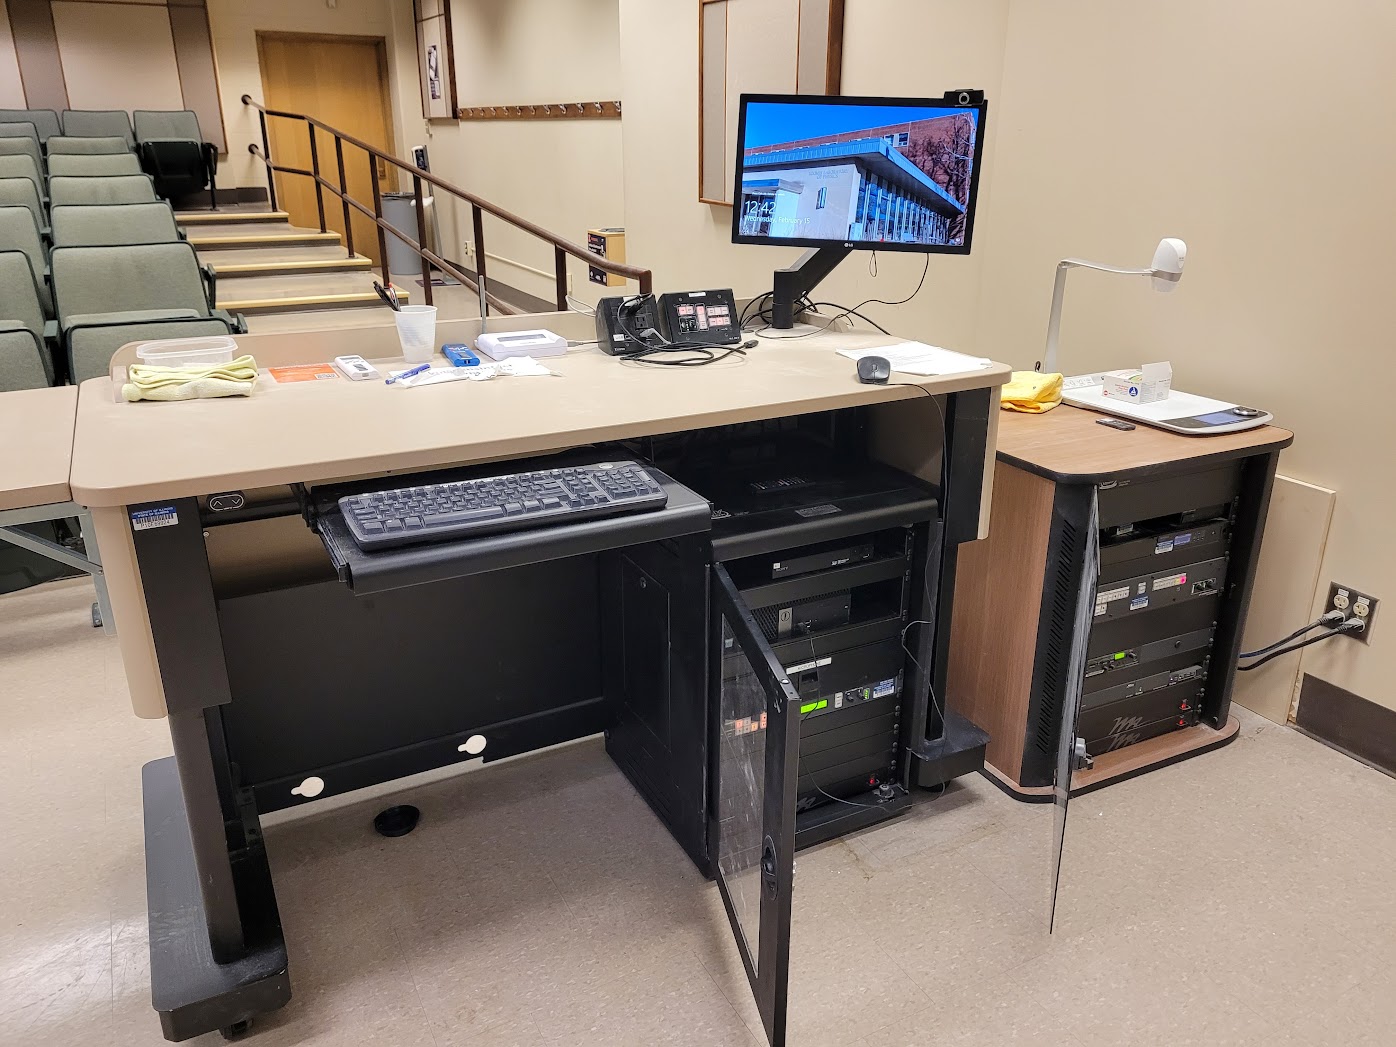 A view of the open cabinet with a computer montior, a push button controller, document camera, and audio visual rack.